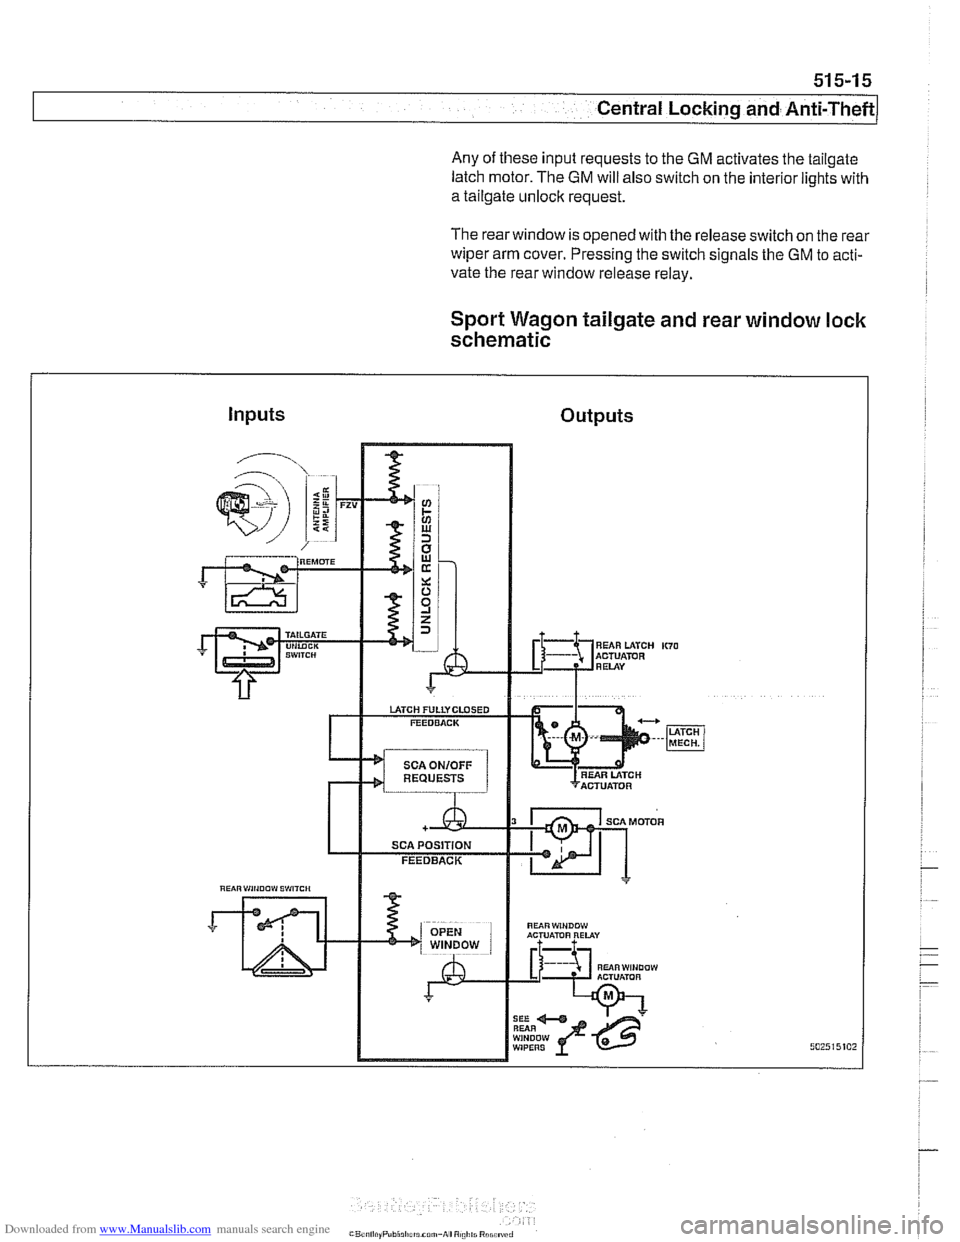 BMW 540i 1999 E39 User Guide Downloaded from www.Manualslib.com manuals search engine 
51 5-1 5 
Central Locking and Anti-Theft 
Any  of these input requests to  the GM activates  the tailgate 
latch motor.  The 
GM will also swi